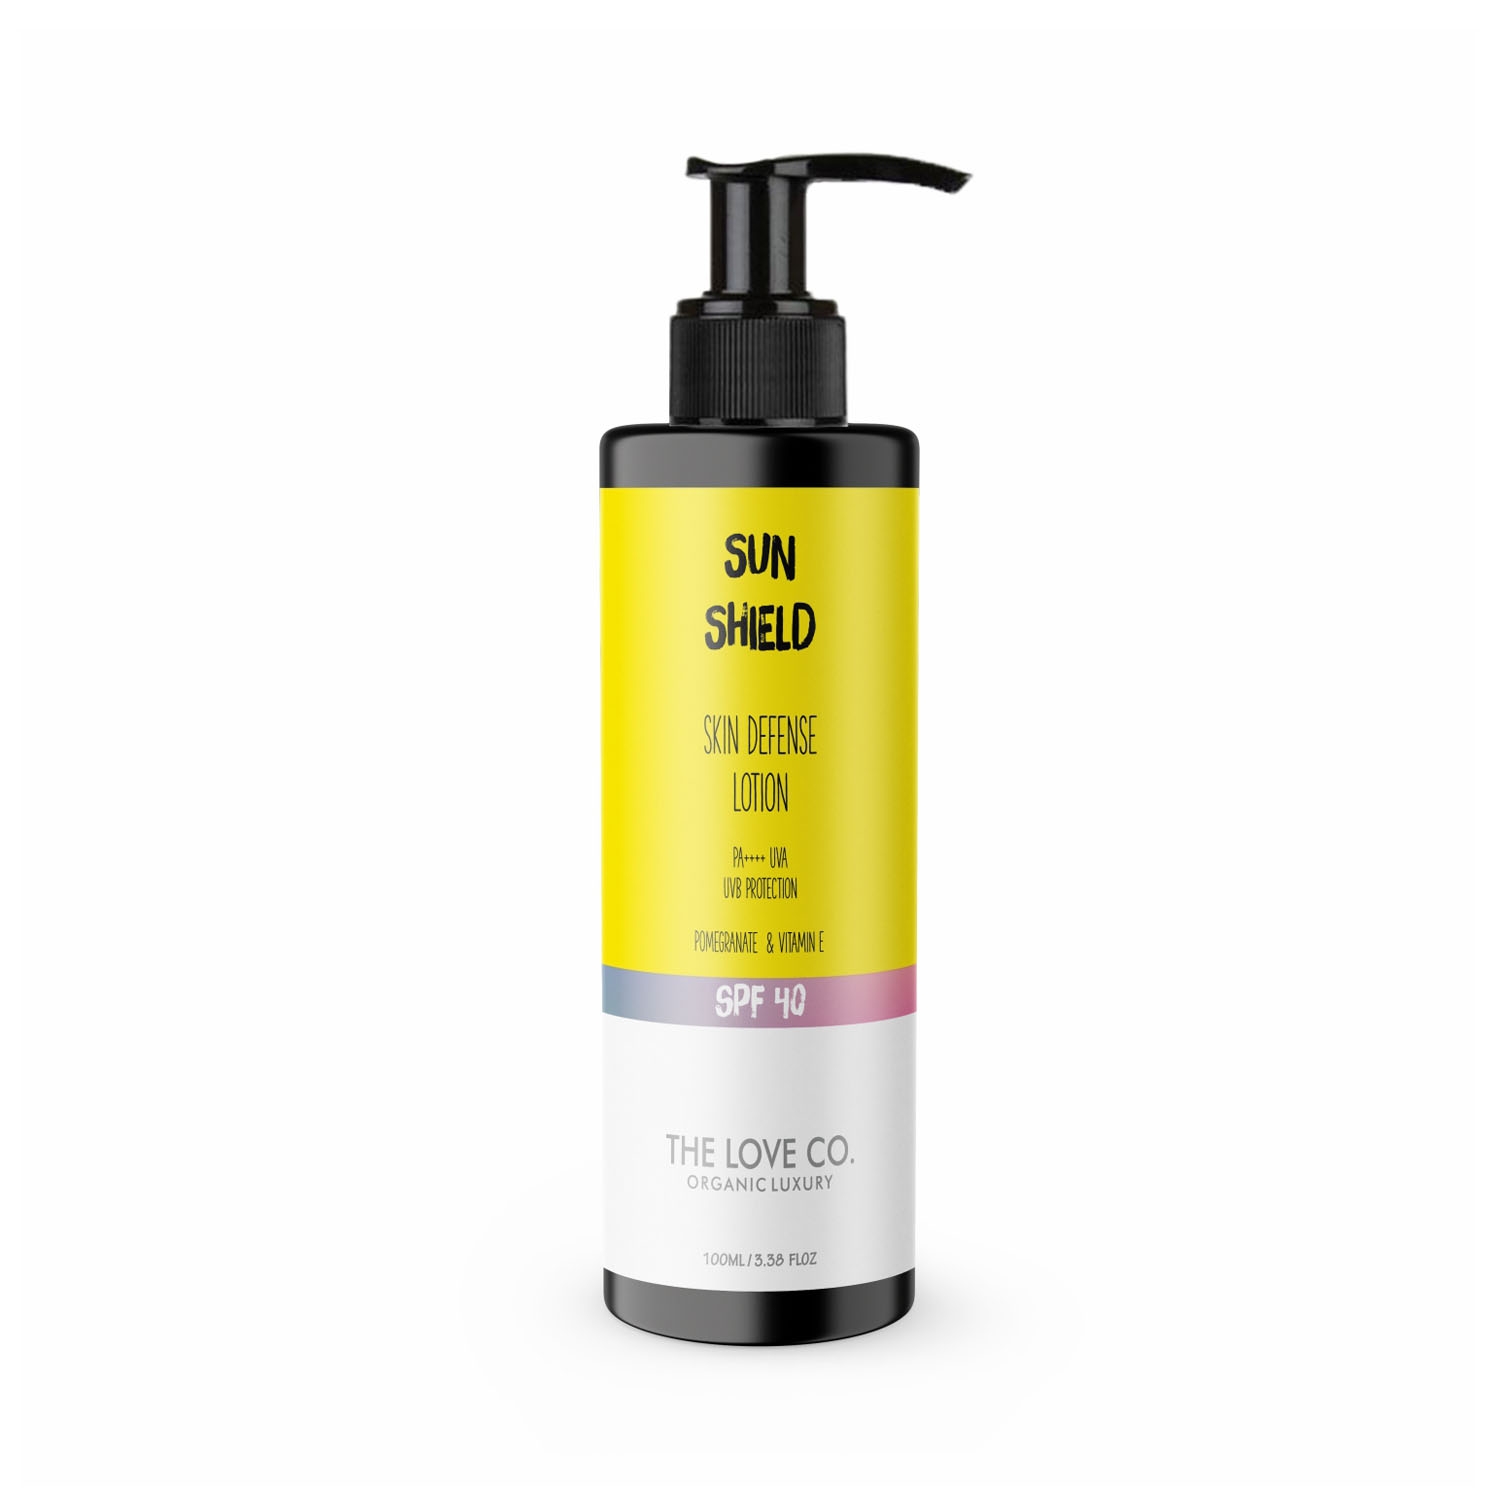 THE LOVE CO. | THE LOVE CO. Skin Defense Sunscreen Lotion With SPF 40 PA++++ UVA/UVB Protection (100ml)